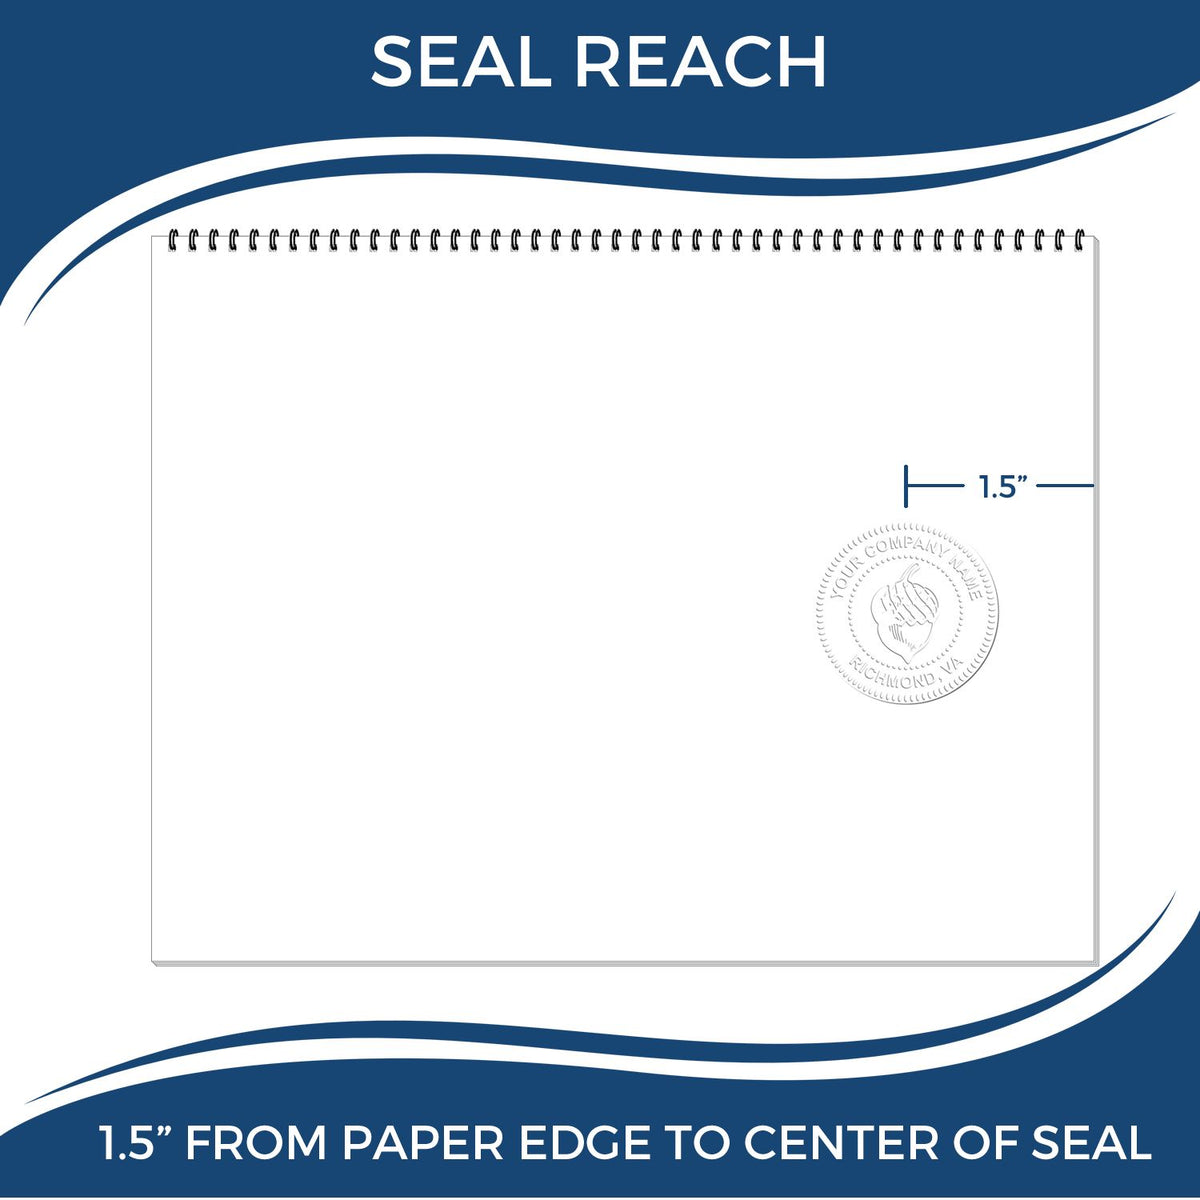 An infographic showing the seal reach which is represented by a ruler and a miniature seal image of the Soft Colorado Professional Geologist Seal